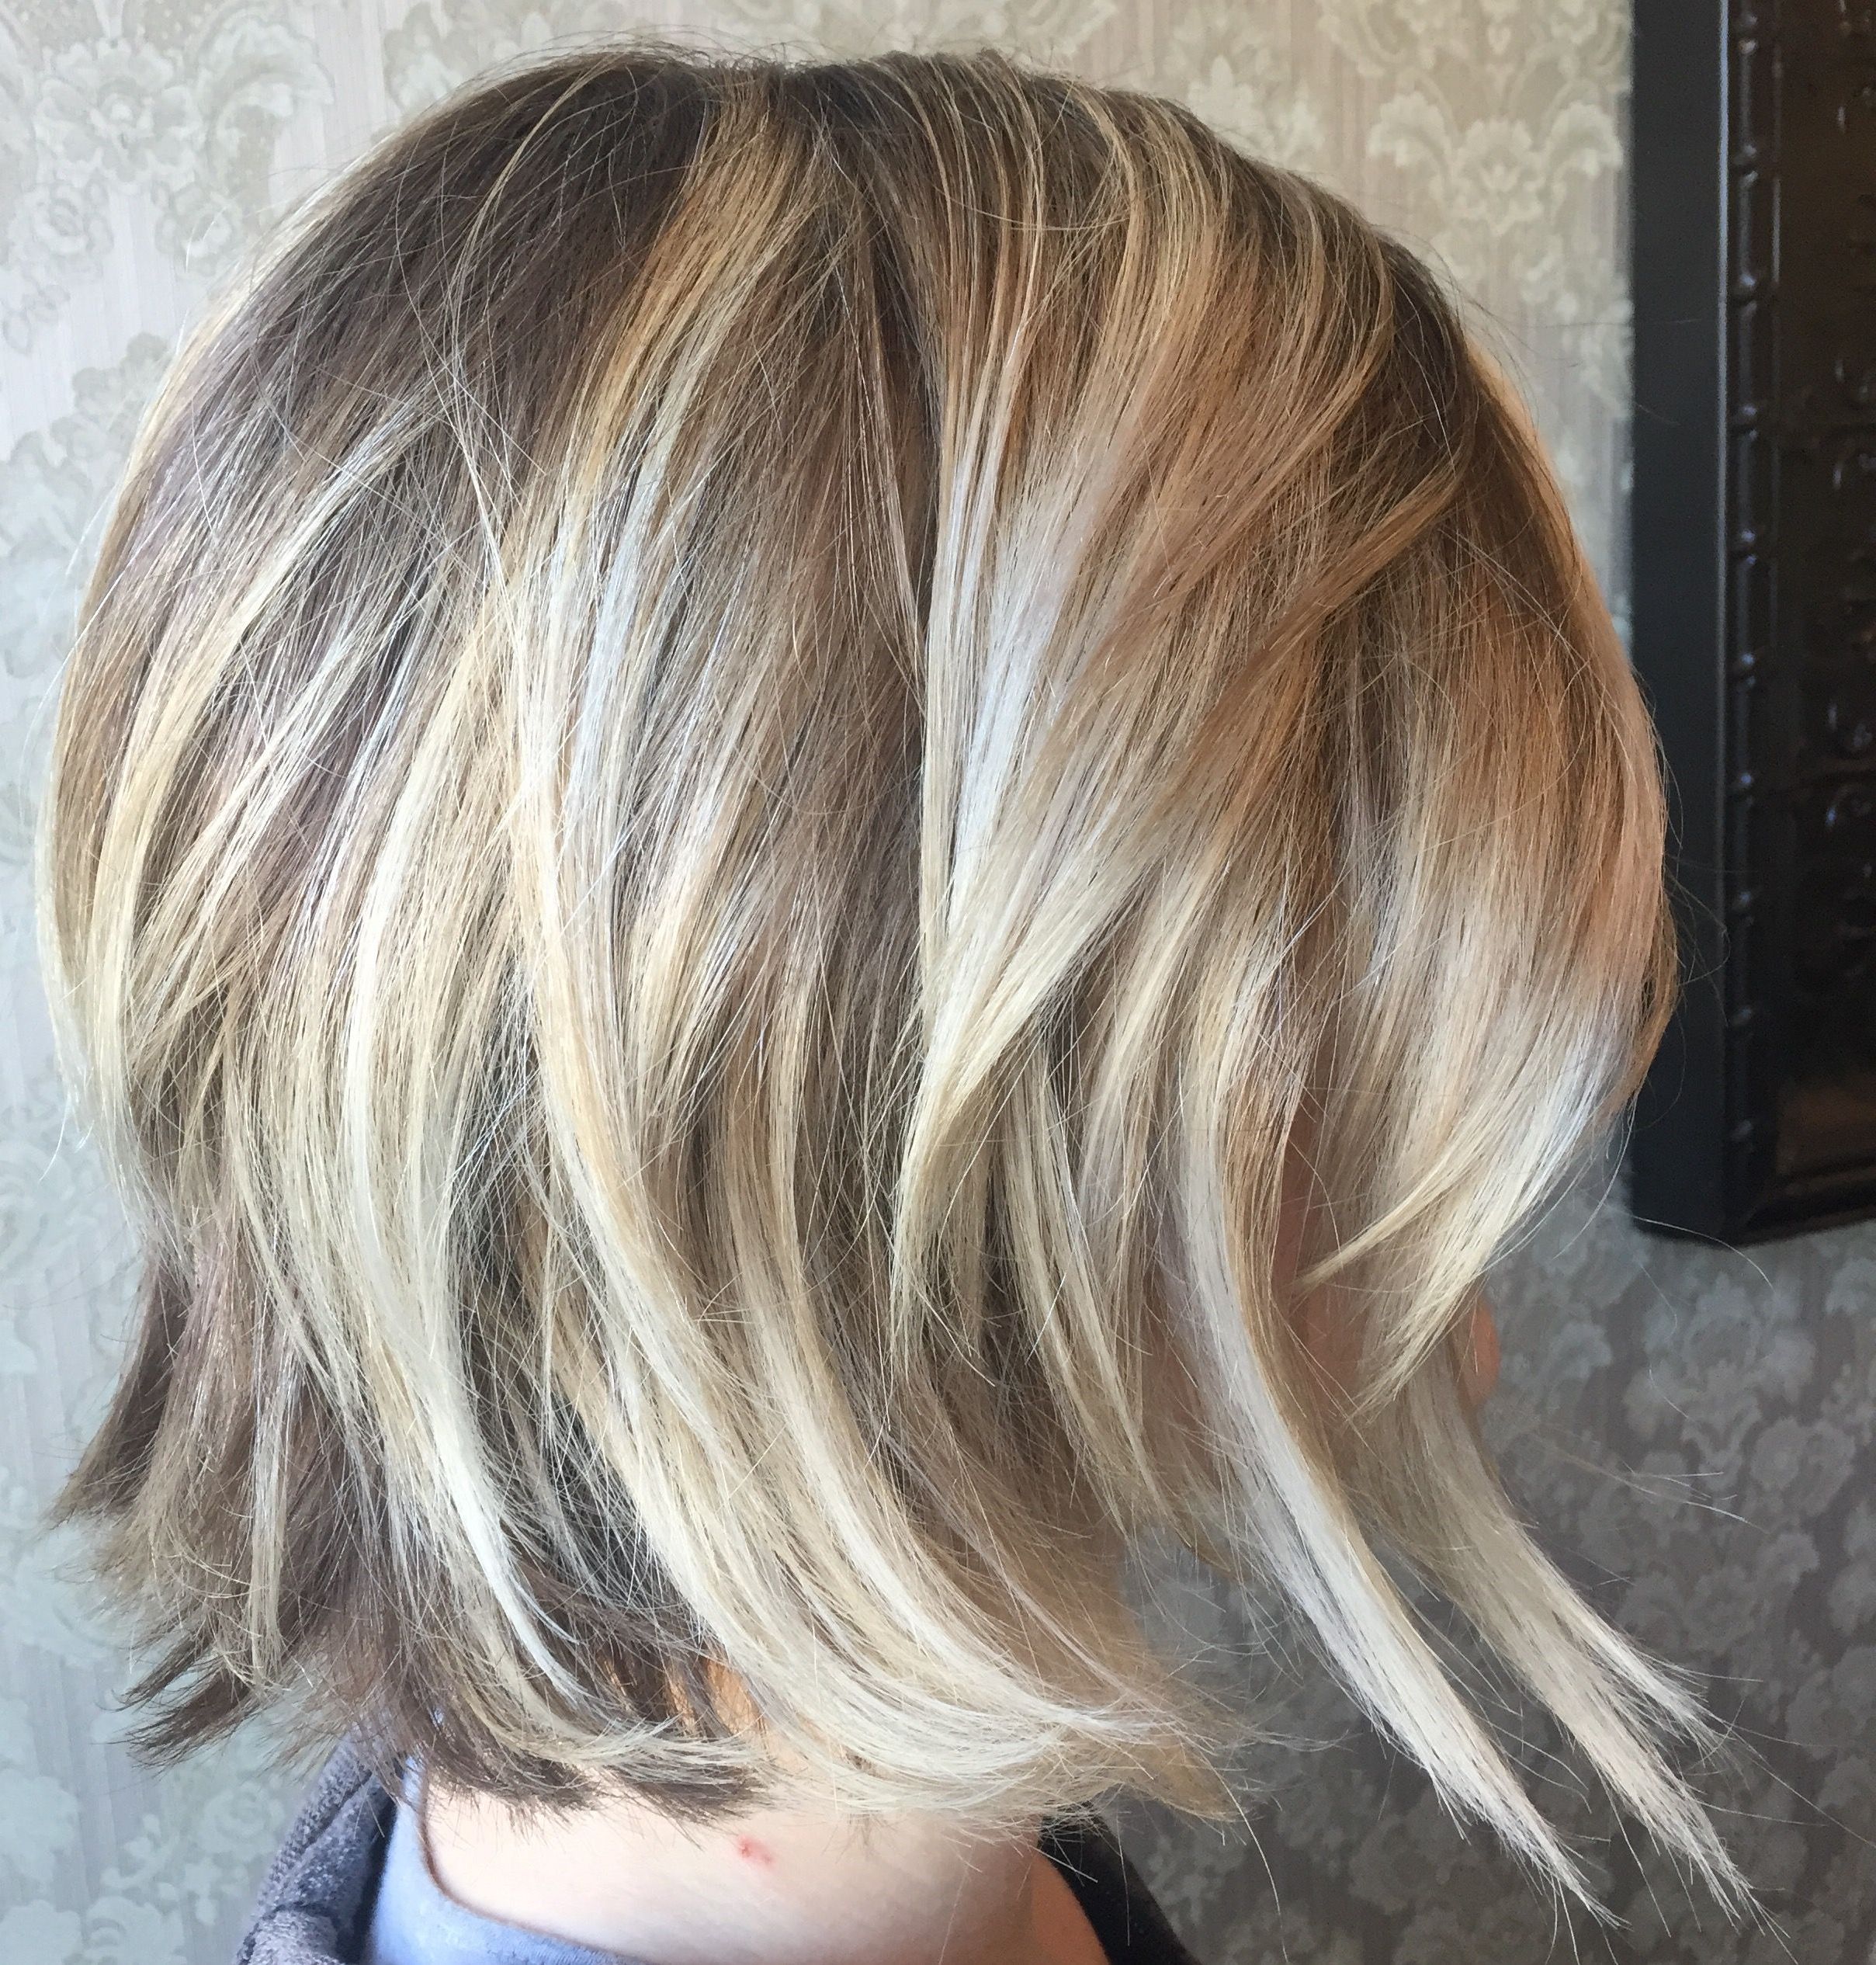 Blonde On Blonde Balayage Highlights, Angled Bob Haircut, Platinum Intended For Blonde Balayage Bob Hairstyles With Angled Layers (View 2 of 20)